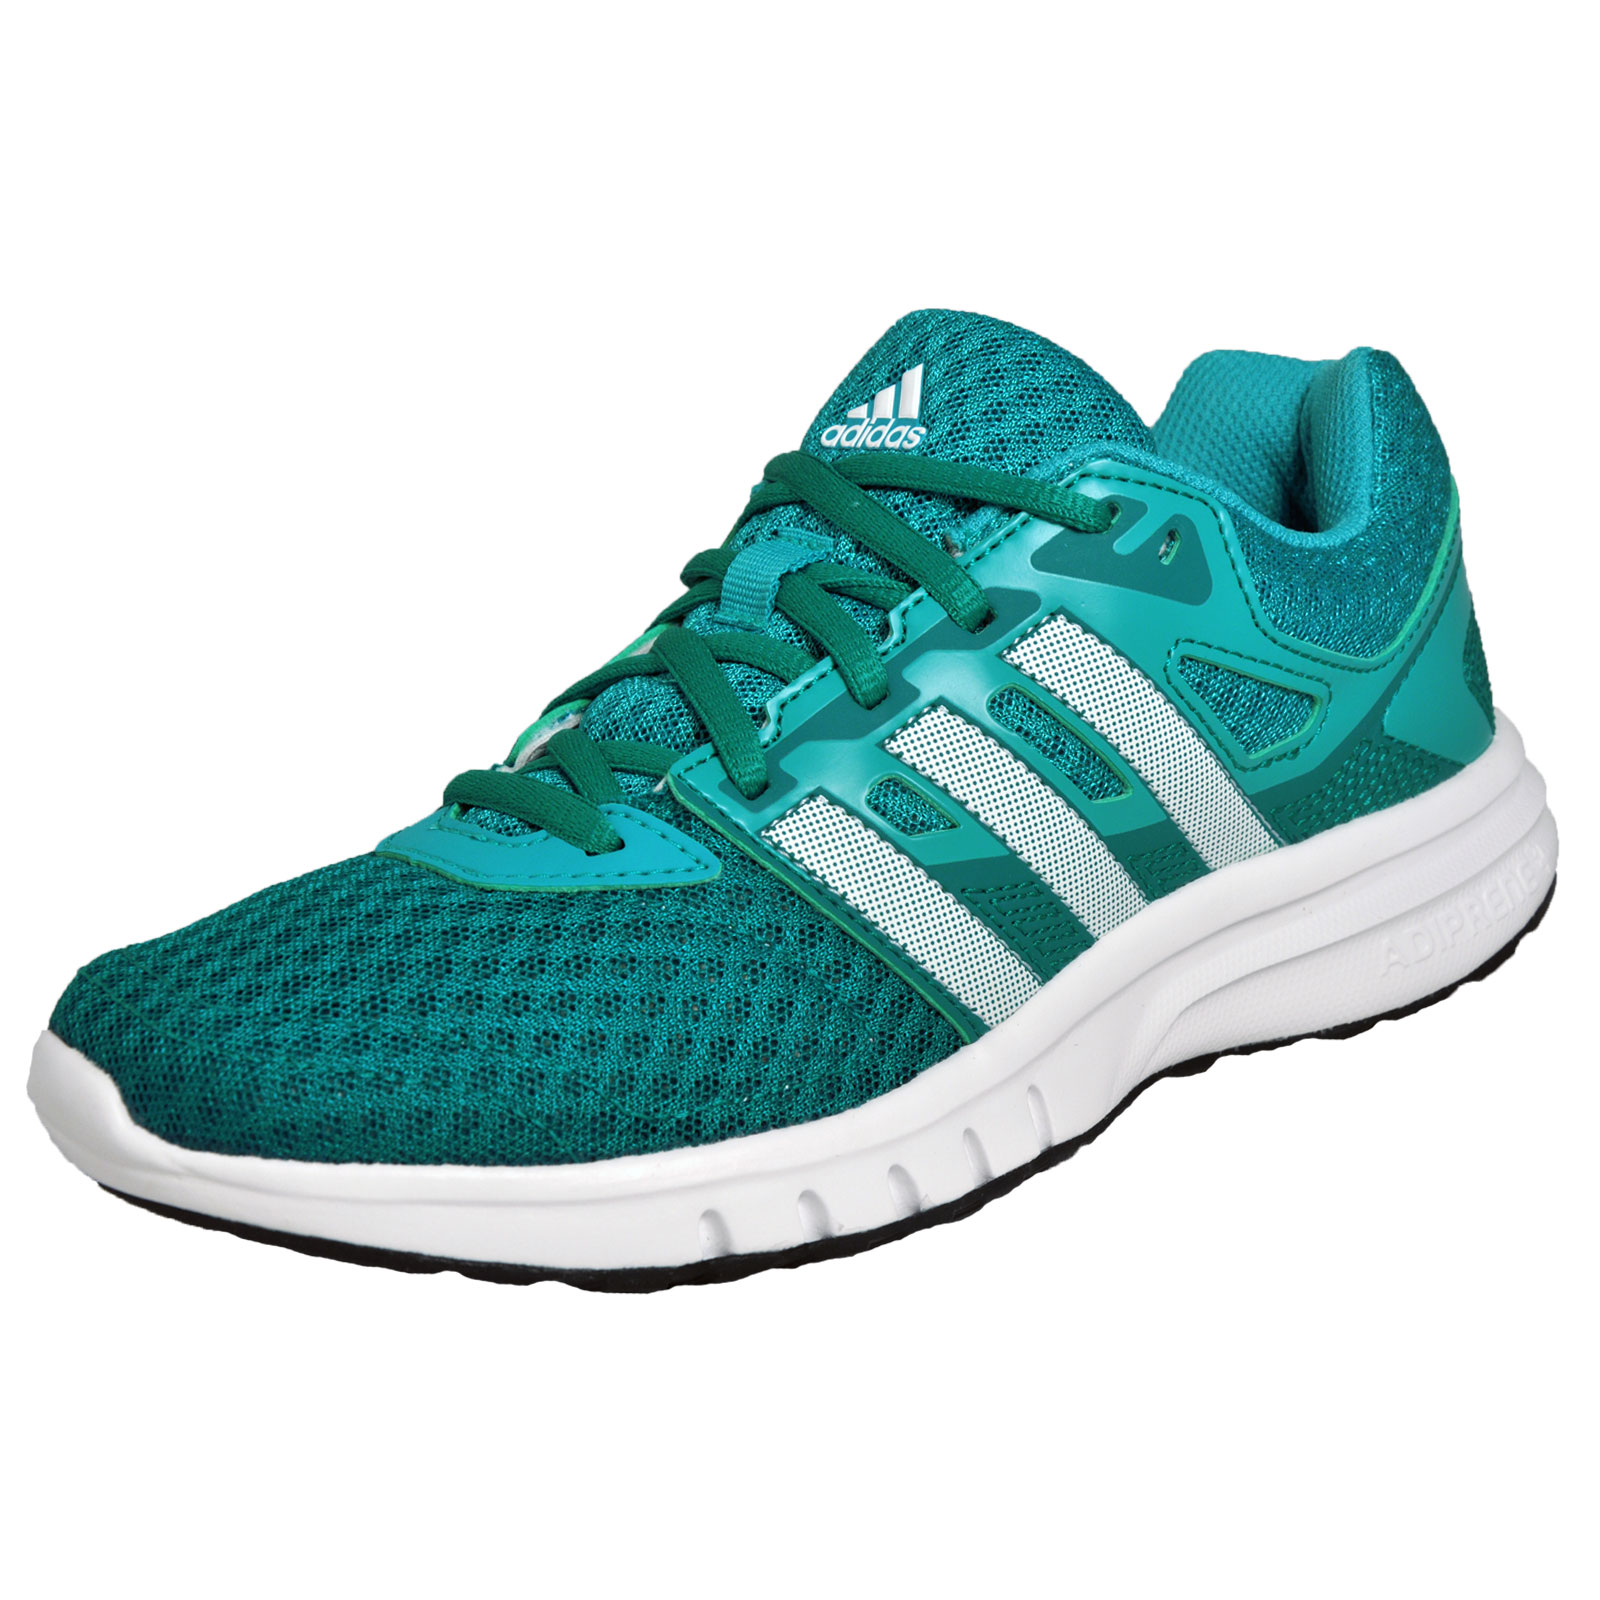 Adidas Galaxy 2 Womens Running Shoes Fitness Gym Trainers